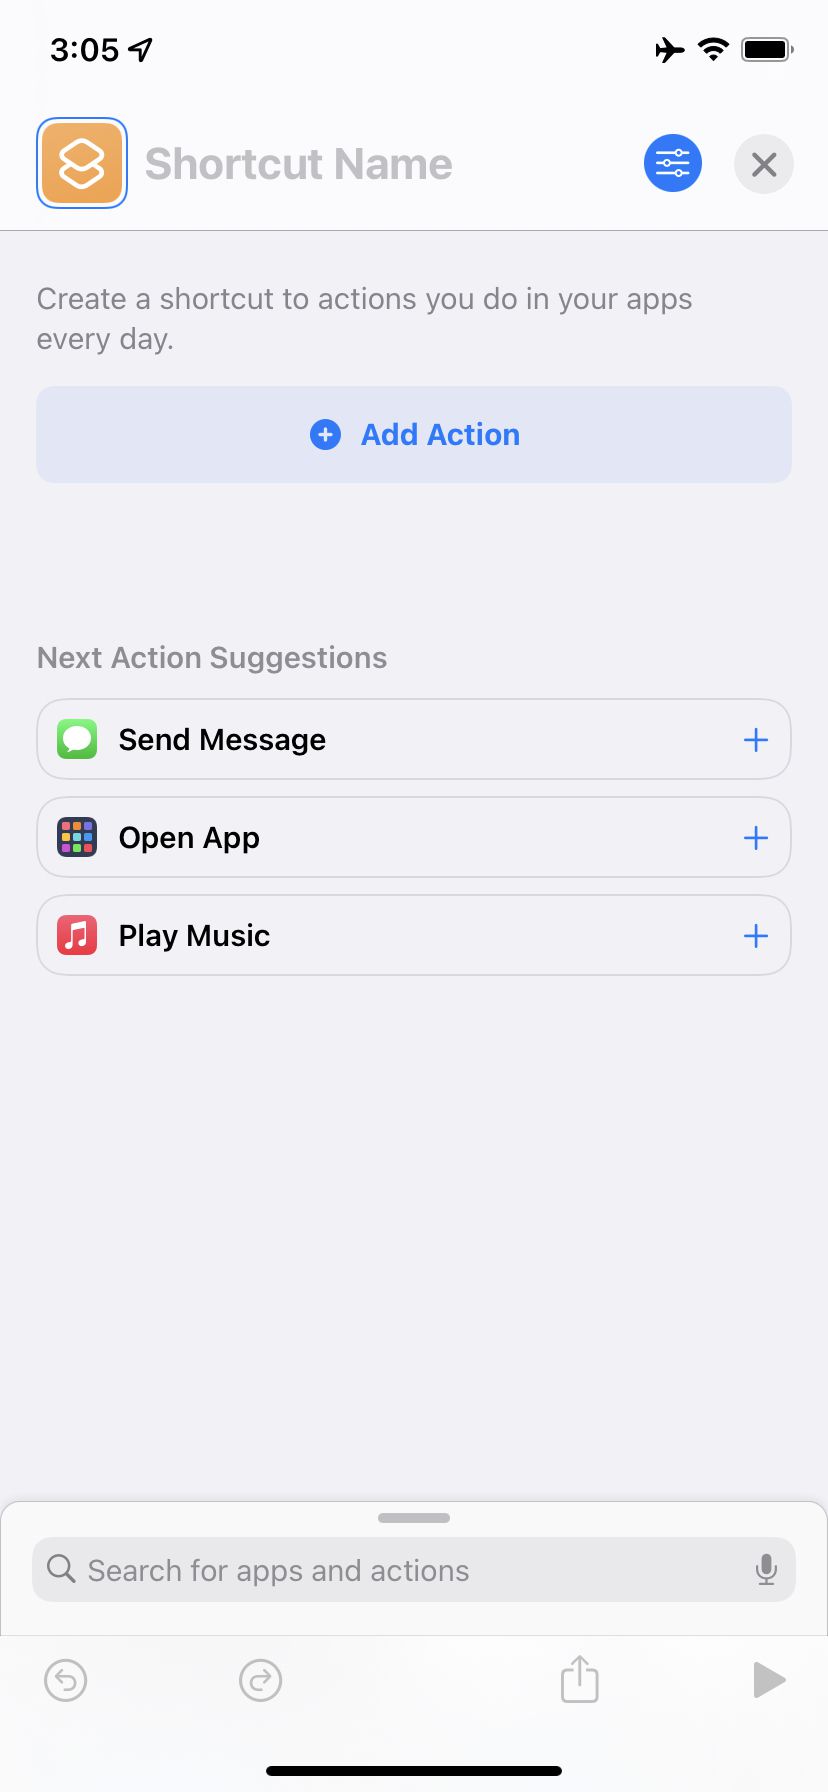 After you select the plus sign to start a new shortcut, tap on Add Action.